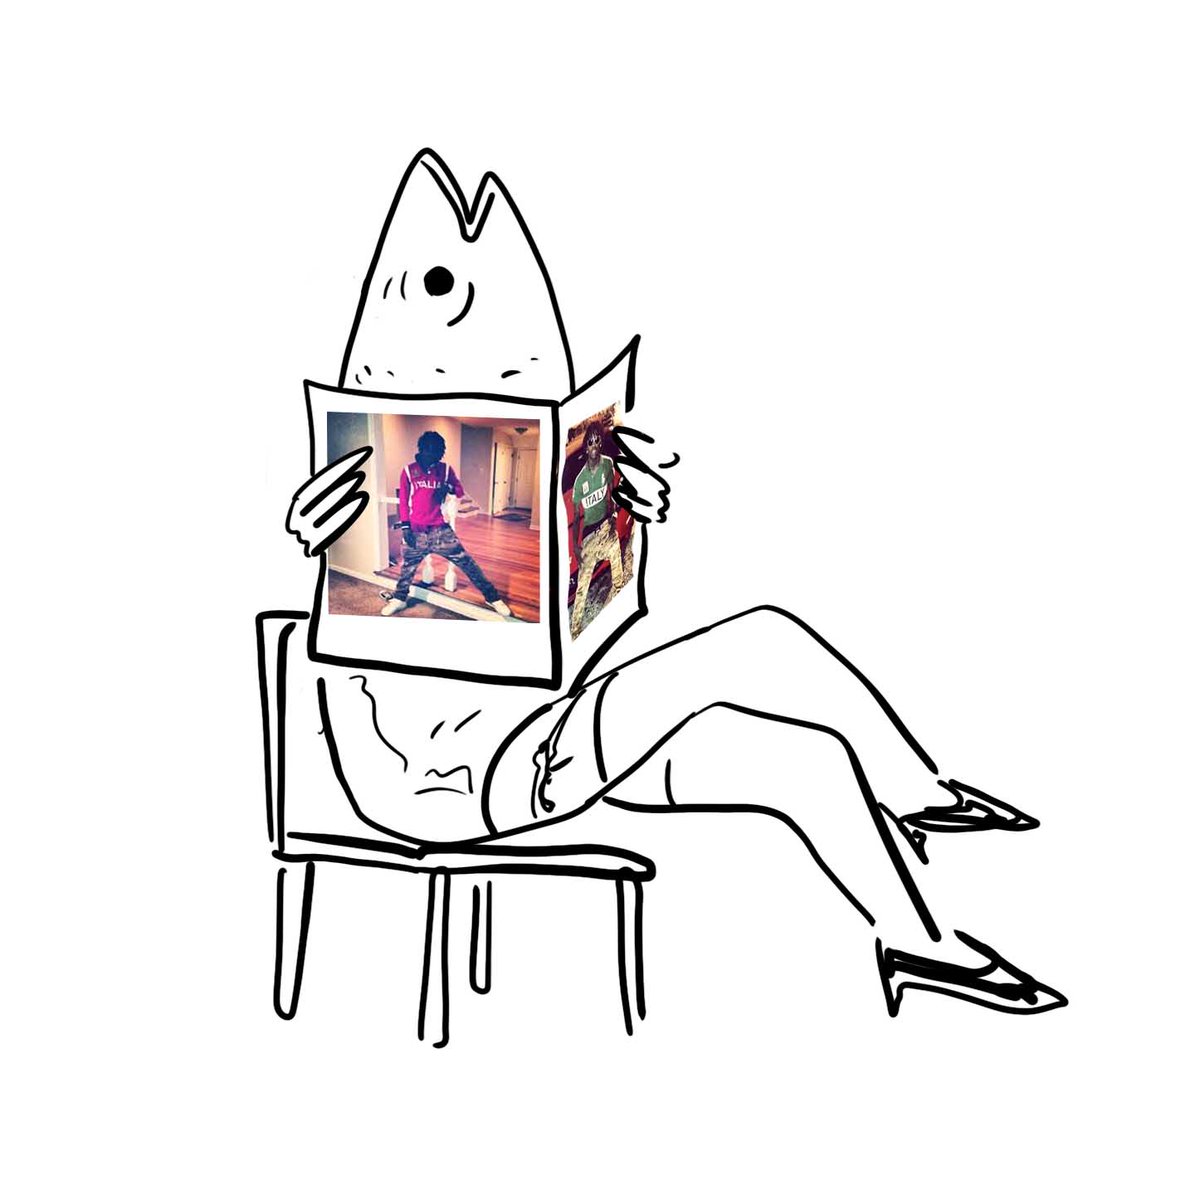 graphic tablet arrived here's slutty Liza Haematocheila (fish species) reading chief keef italy